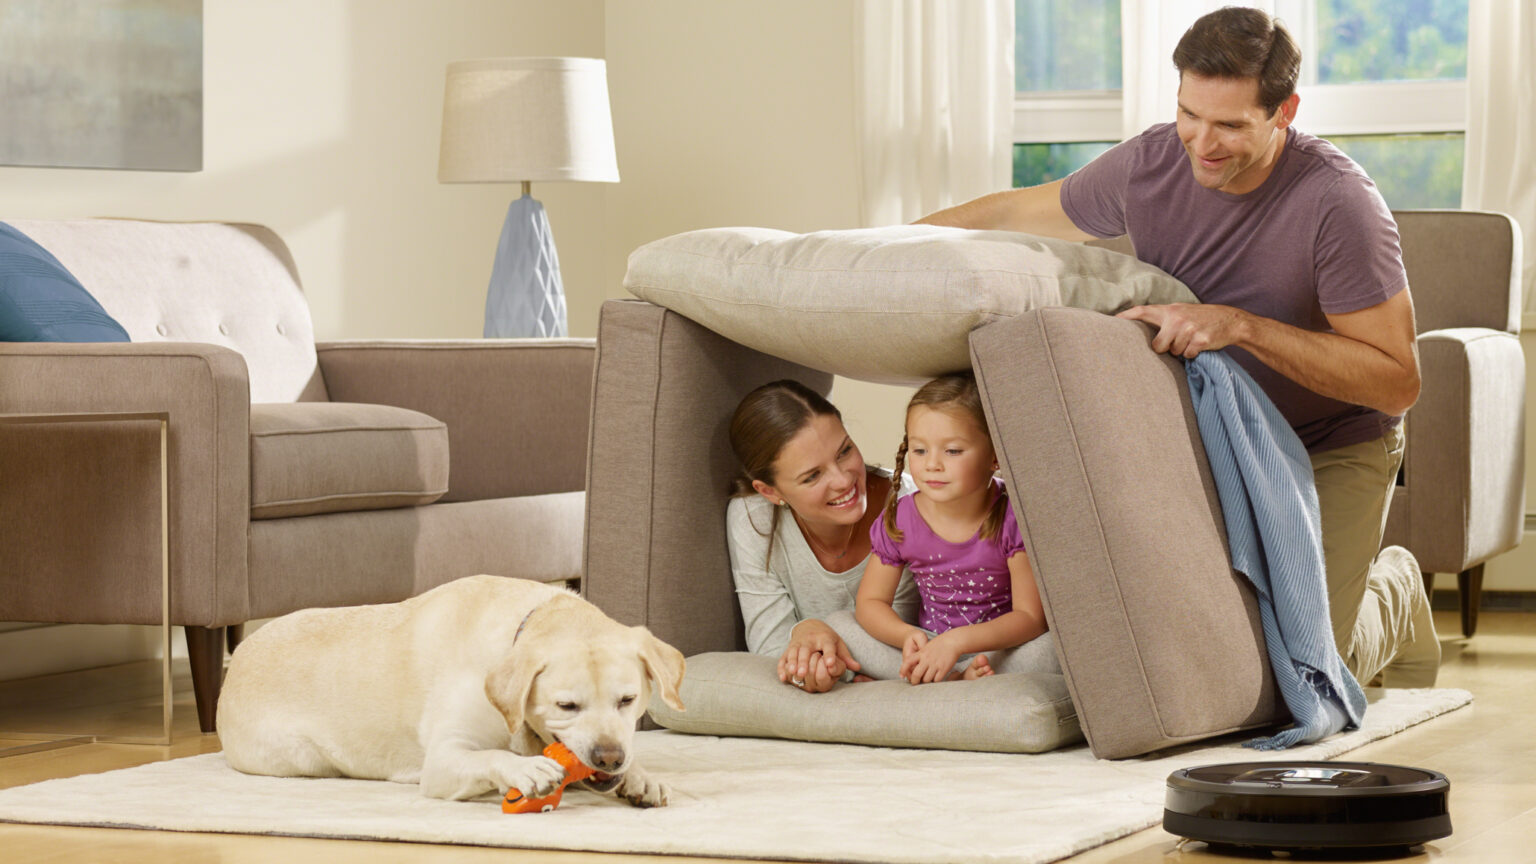 Smart tech products like the iRobot Roomba vacuum will help keep dogs happy and their owners smiling. Image: iRobot.